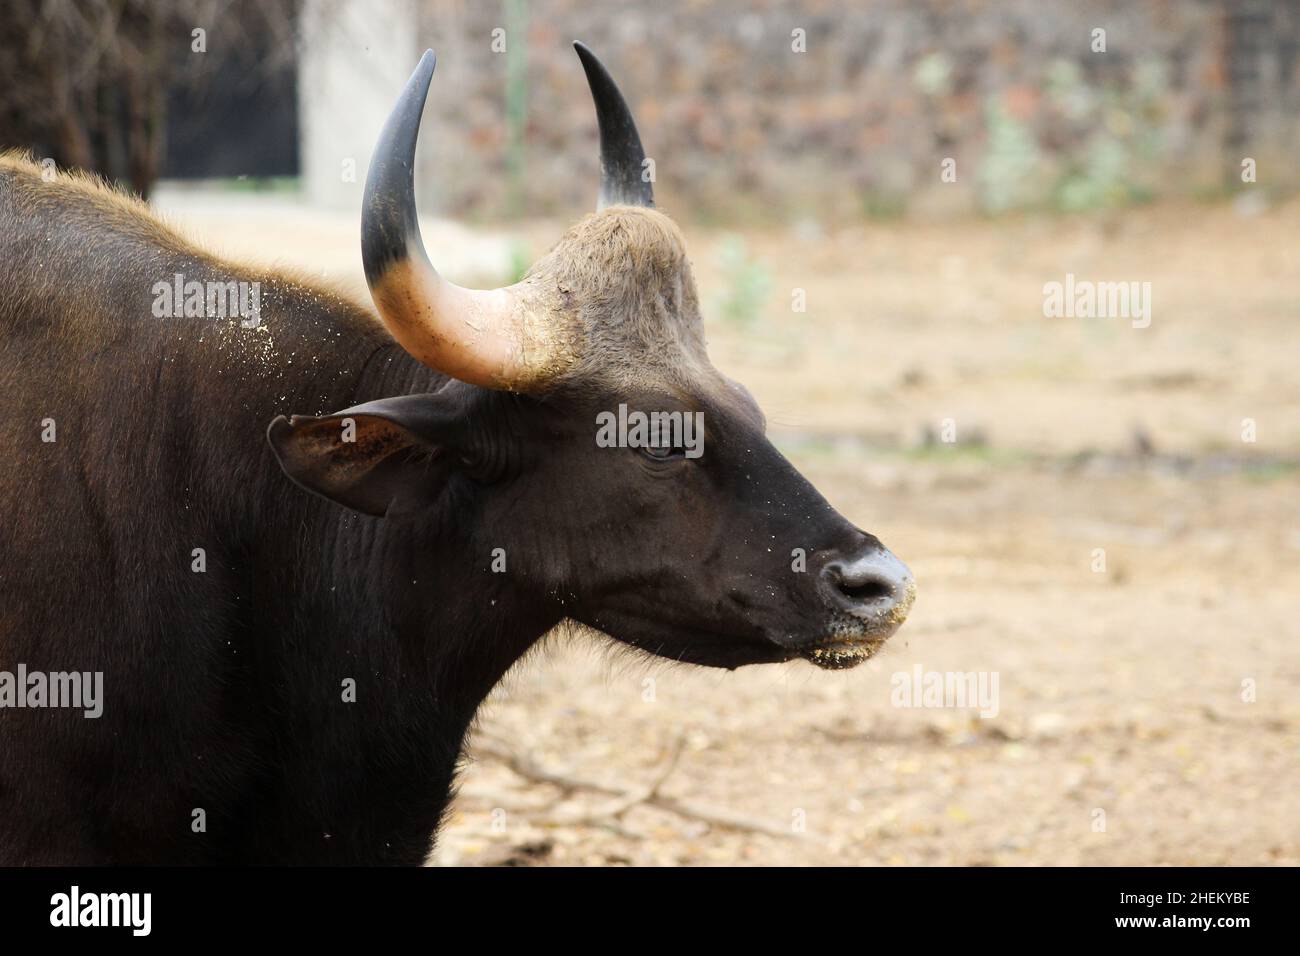 Gaur is also known as the Indian bison, is a bovine native to South and Southeast Asia, and has been listed as Vulnerable Stock Photo